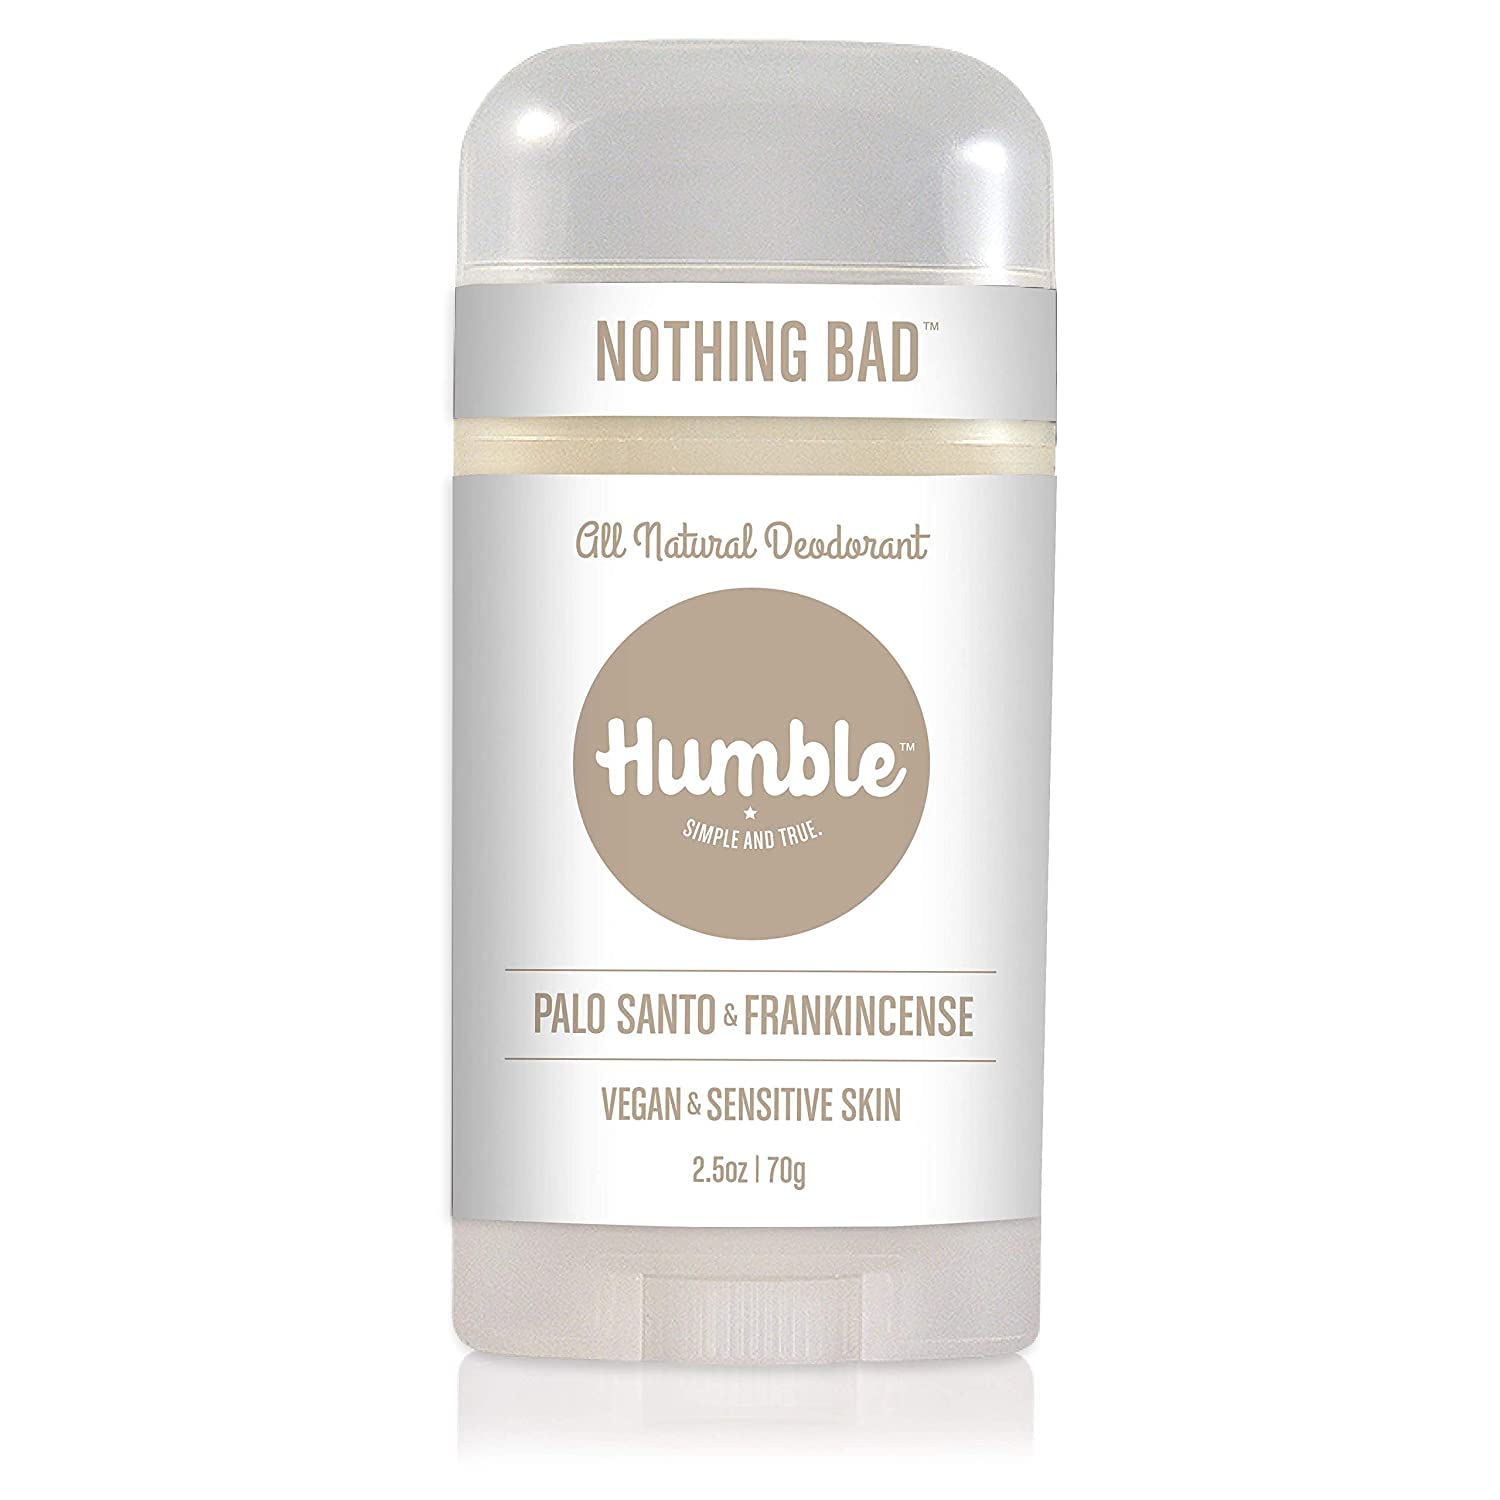 HUMBLE BRANDS Aluminum-Free Natural Deodorant for Women and Men, Cruelty-Free Vegan Deodorant, Formulated for Sensitive Skin, Palo Santo and Frankincense, 2.5 Ounce (Pack of 1)